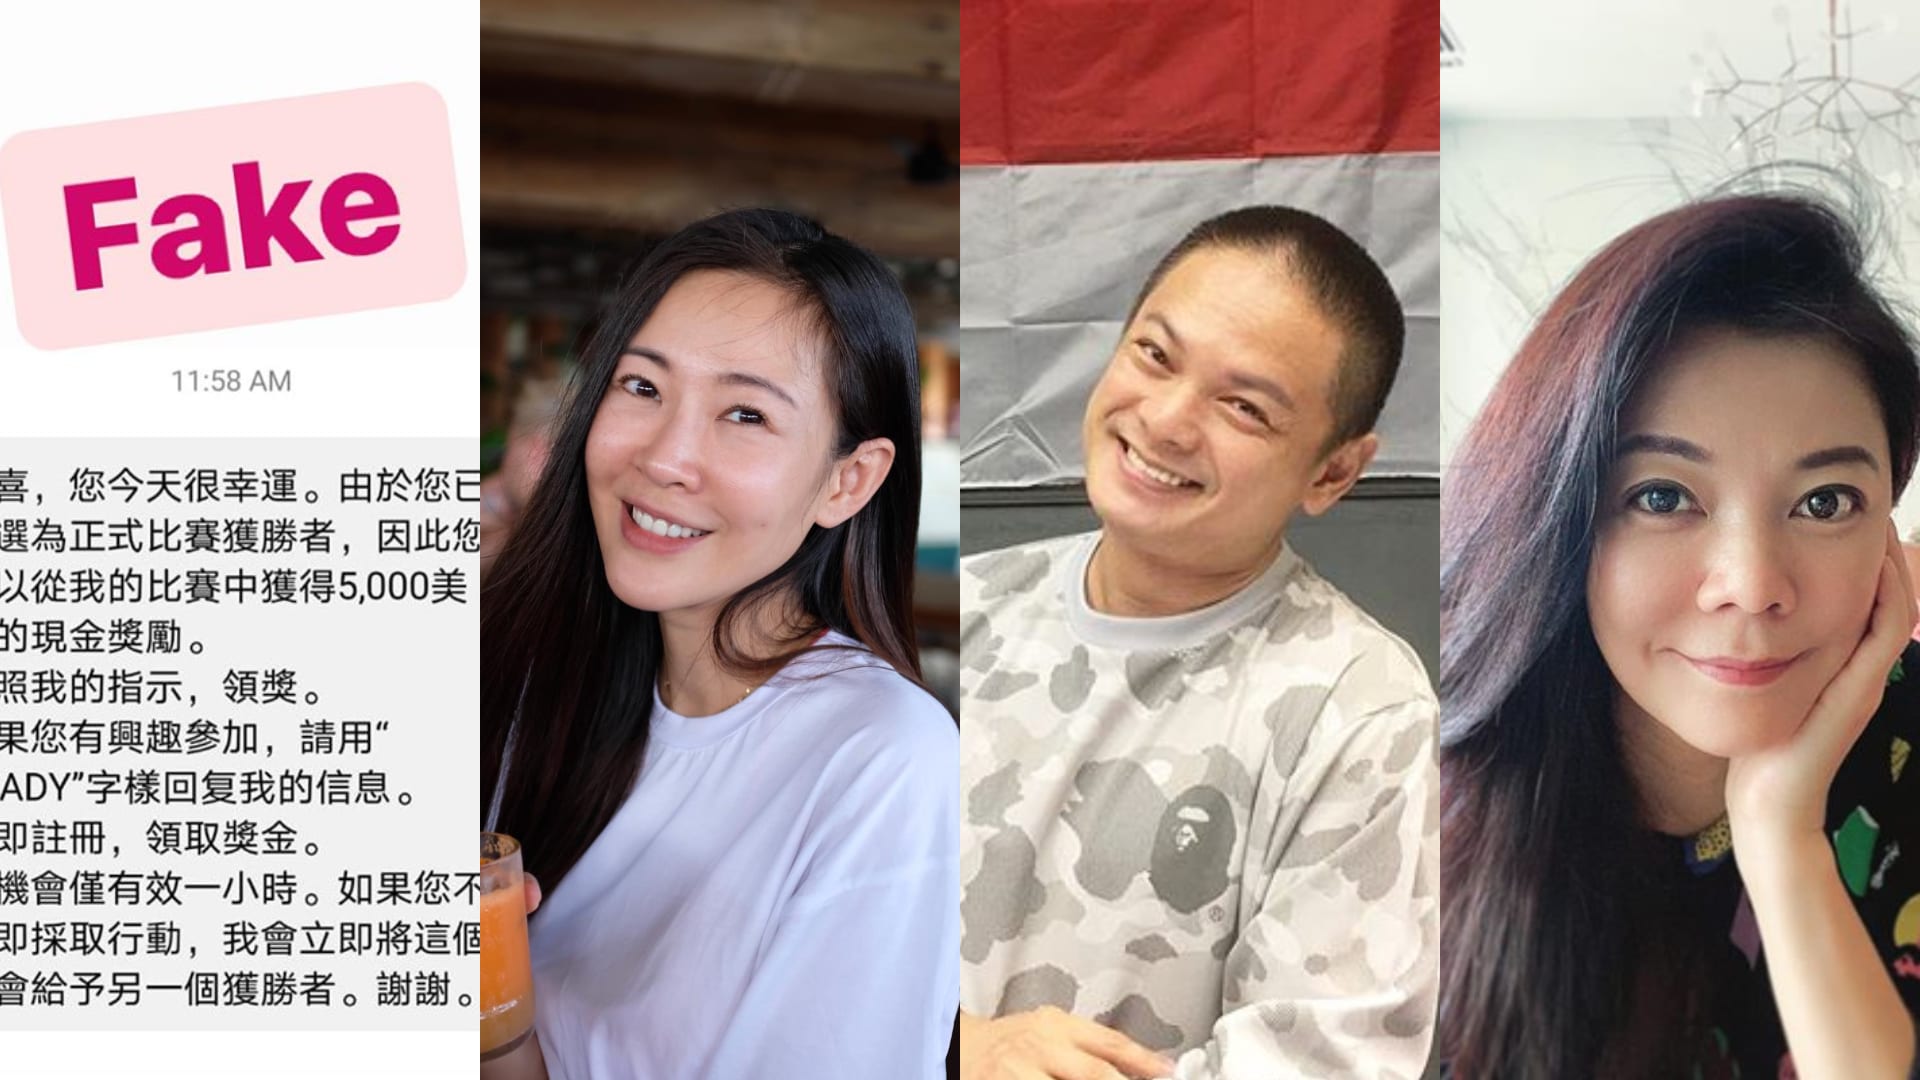 Jesseca Liu, Dennis Chew And Michelle Chong Are Sick Of Online Imposters DM-ing Their Fans